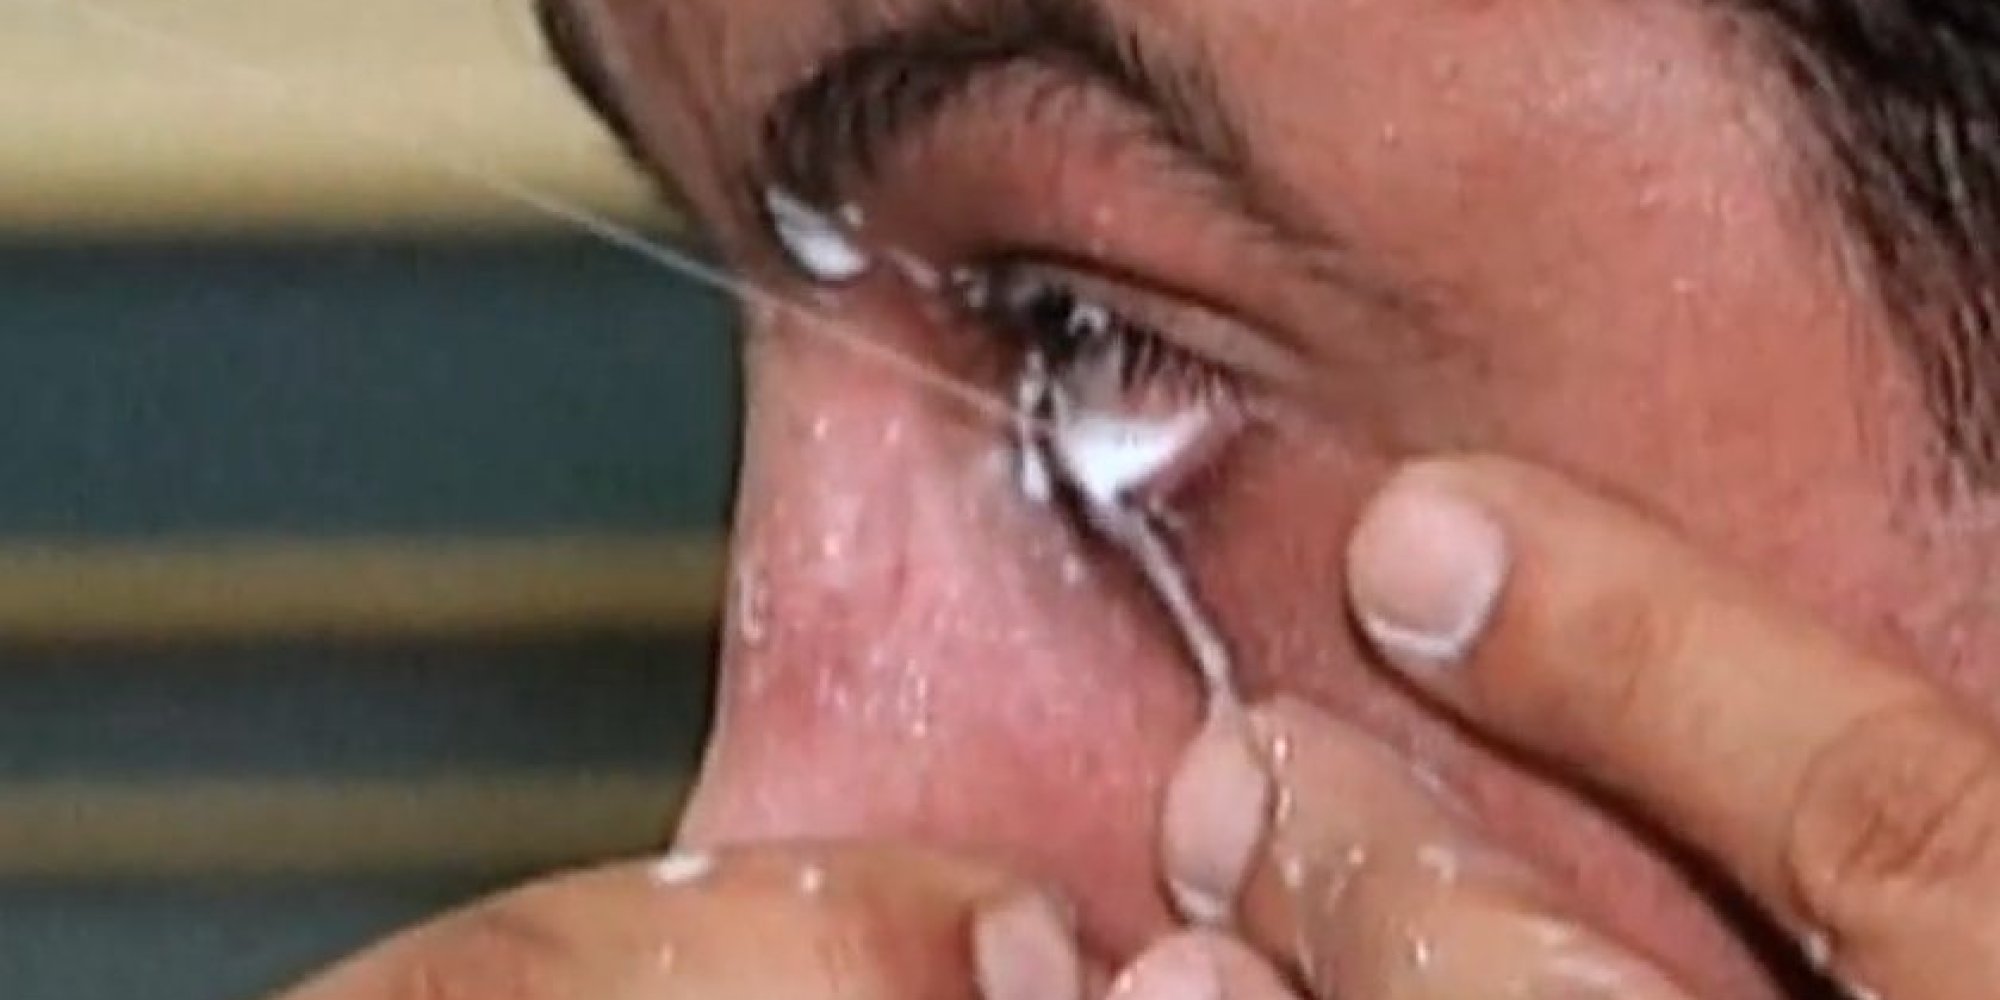 How To Squirt Milk From Your Eye Not That You Should